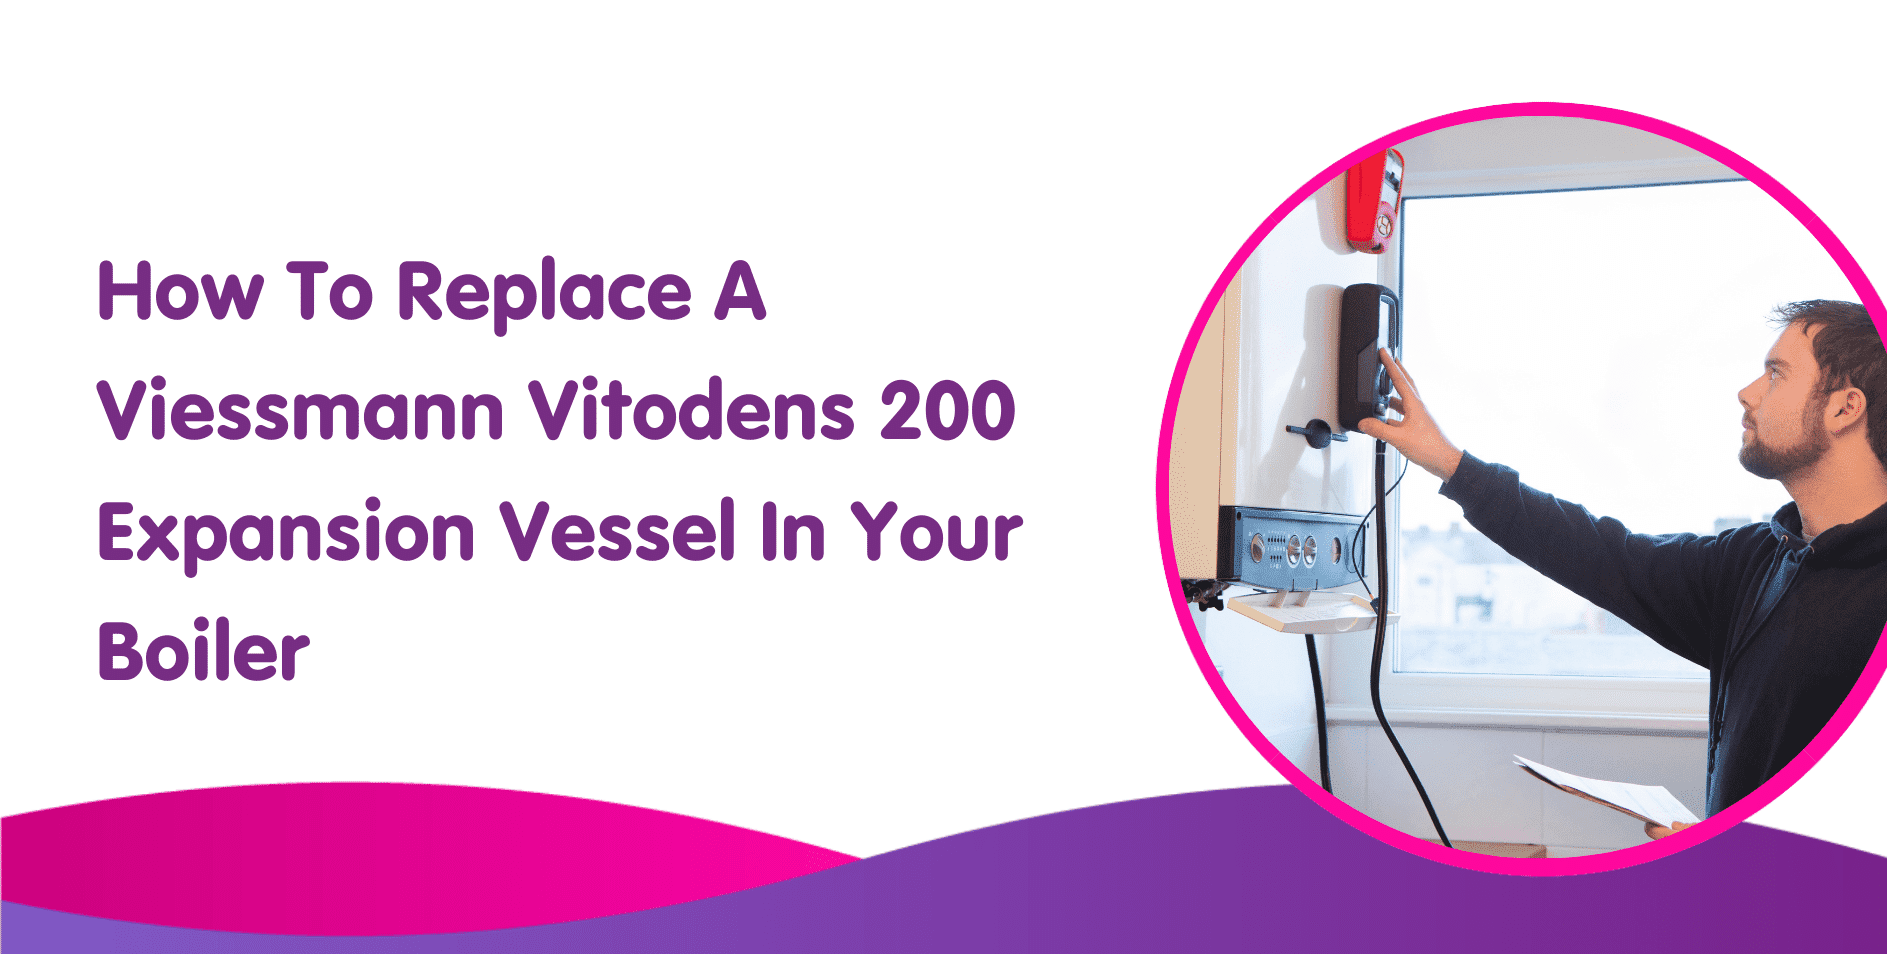 How To Replace A Viessmann Vitodens 200 Expansion Vessel In Your Boiler